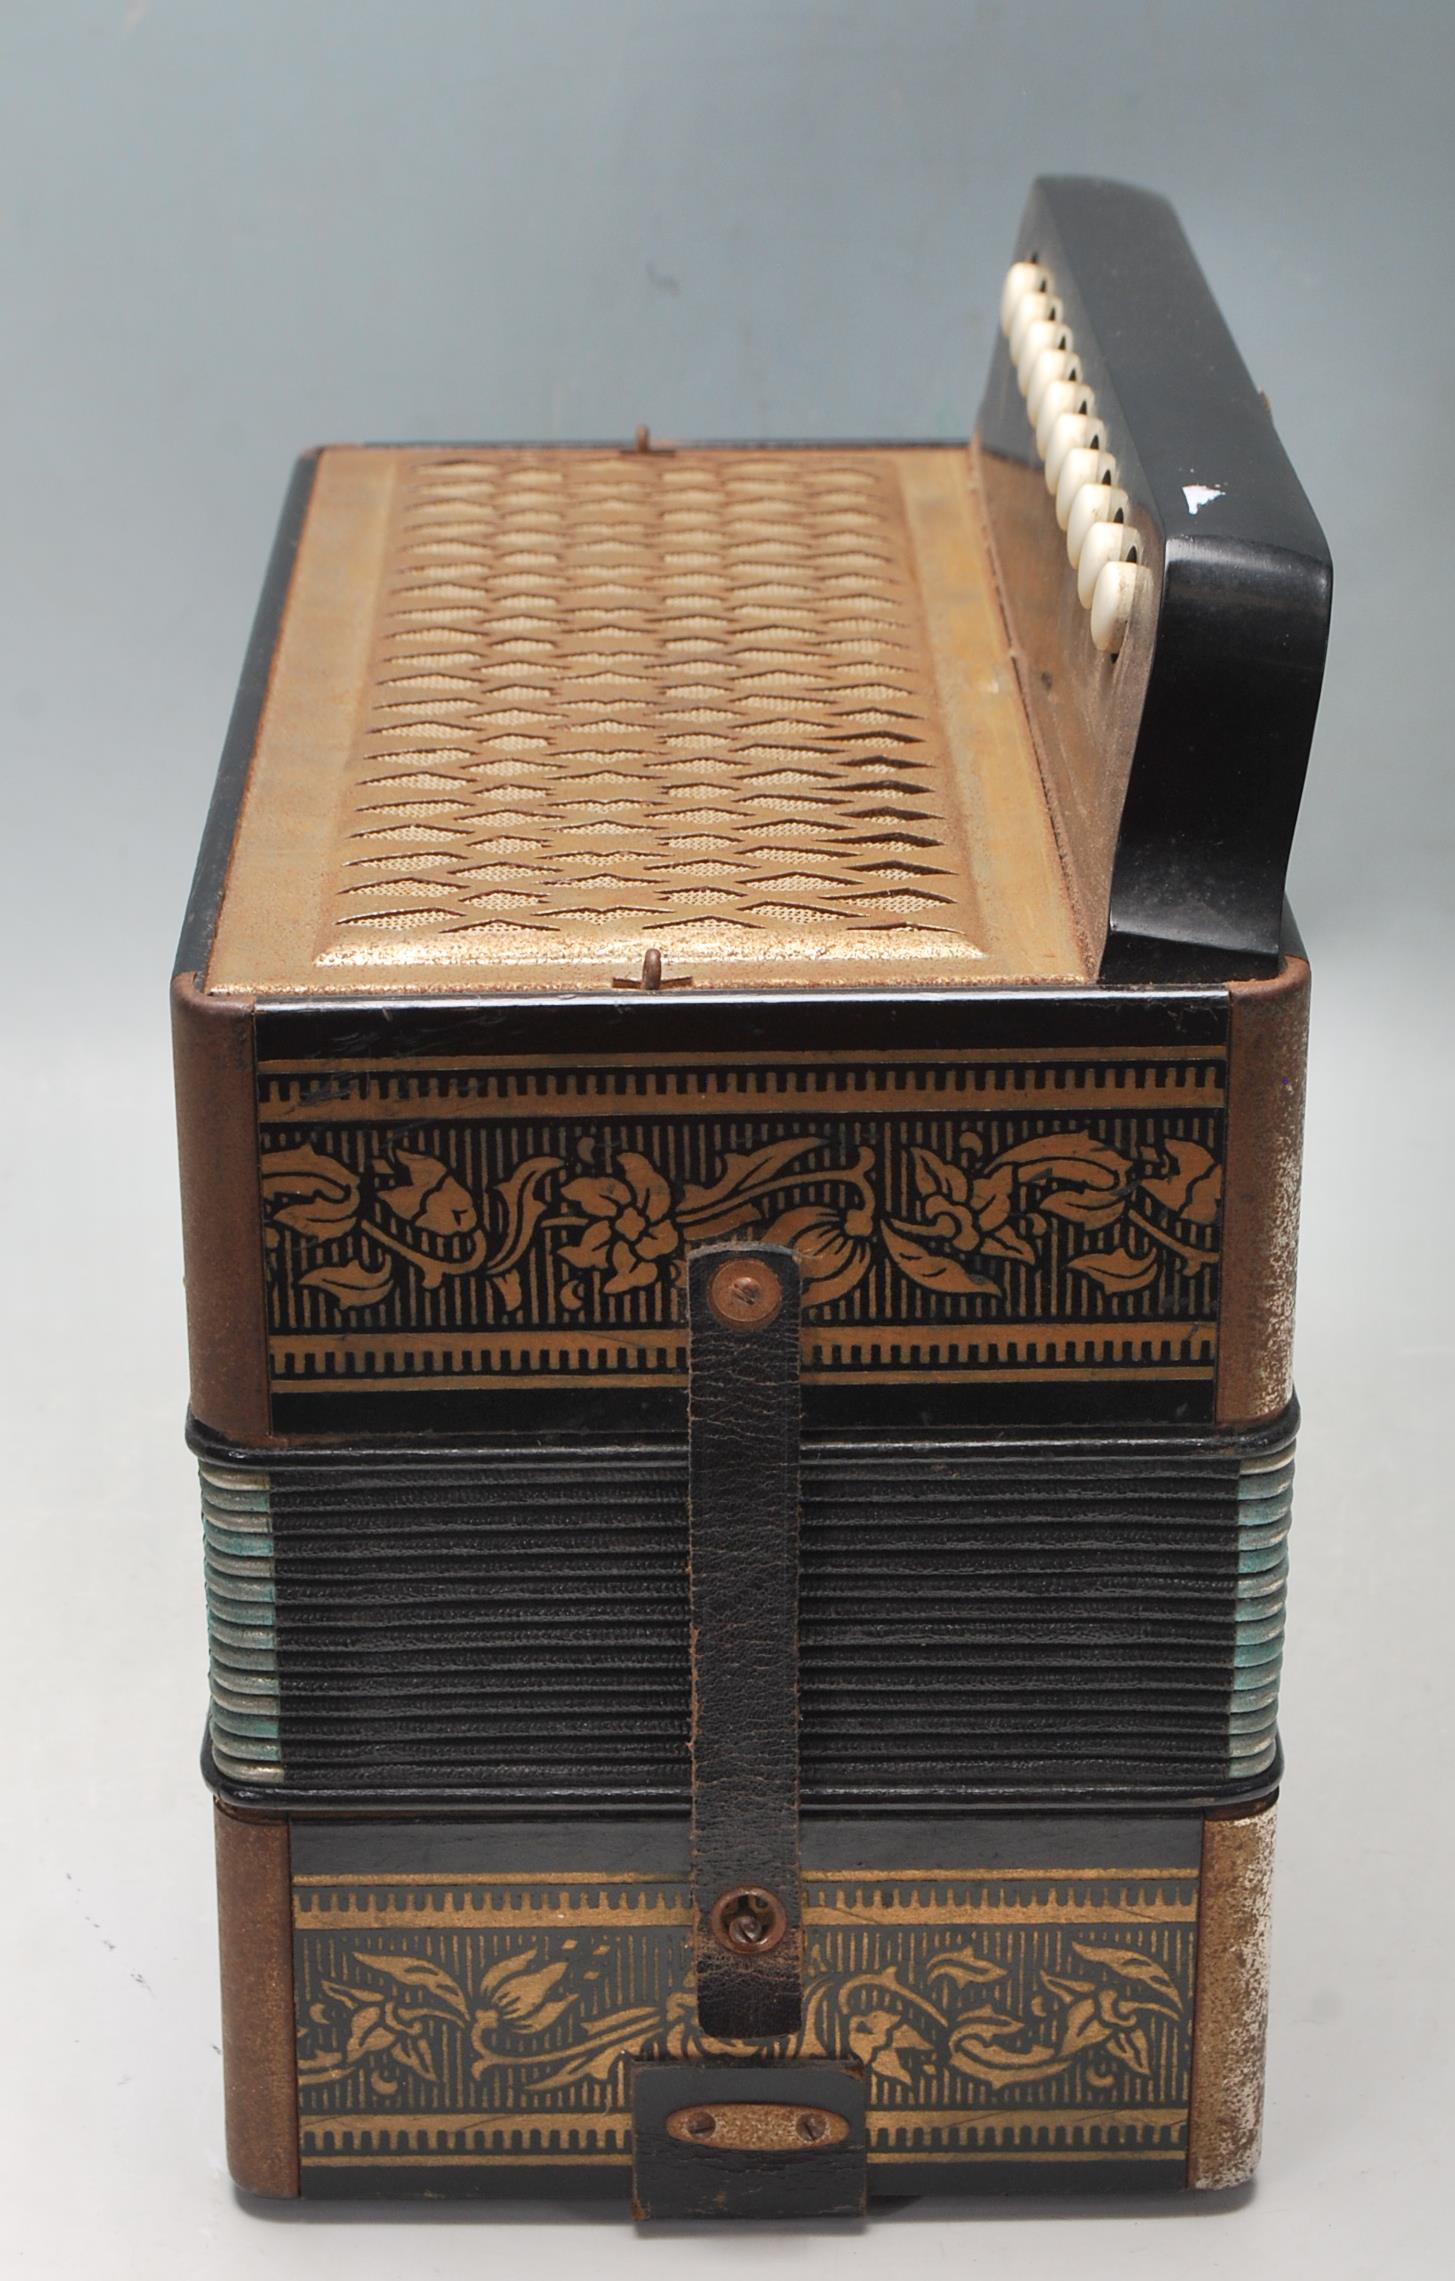 EARLY 20TH CENTURY 1930S VINTAGE ACCORDIAN BY HOHNER - Image 7 of 7